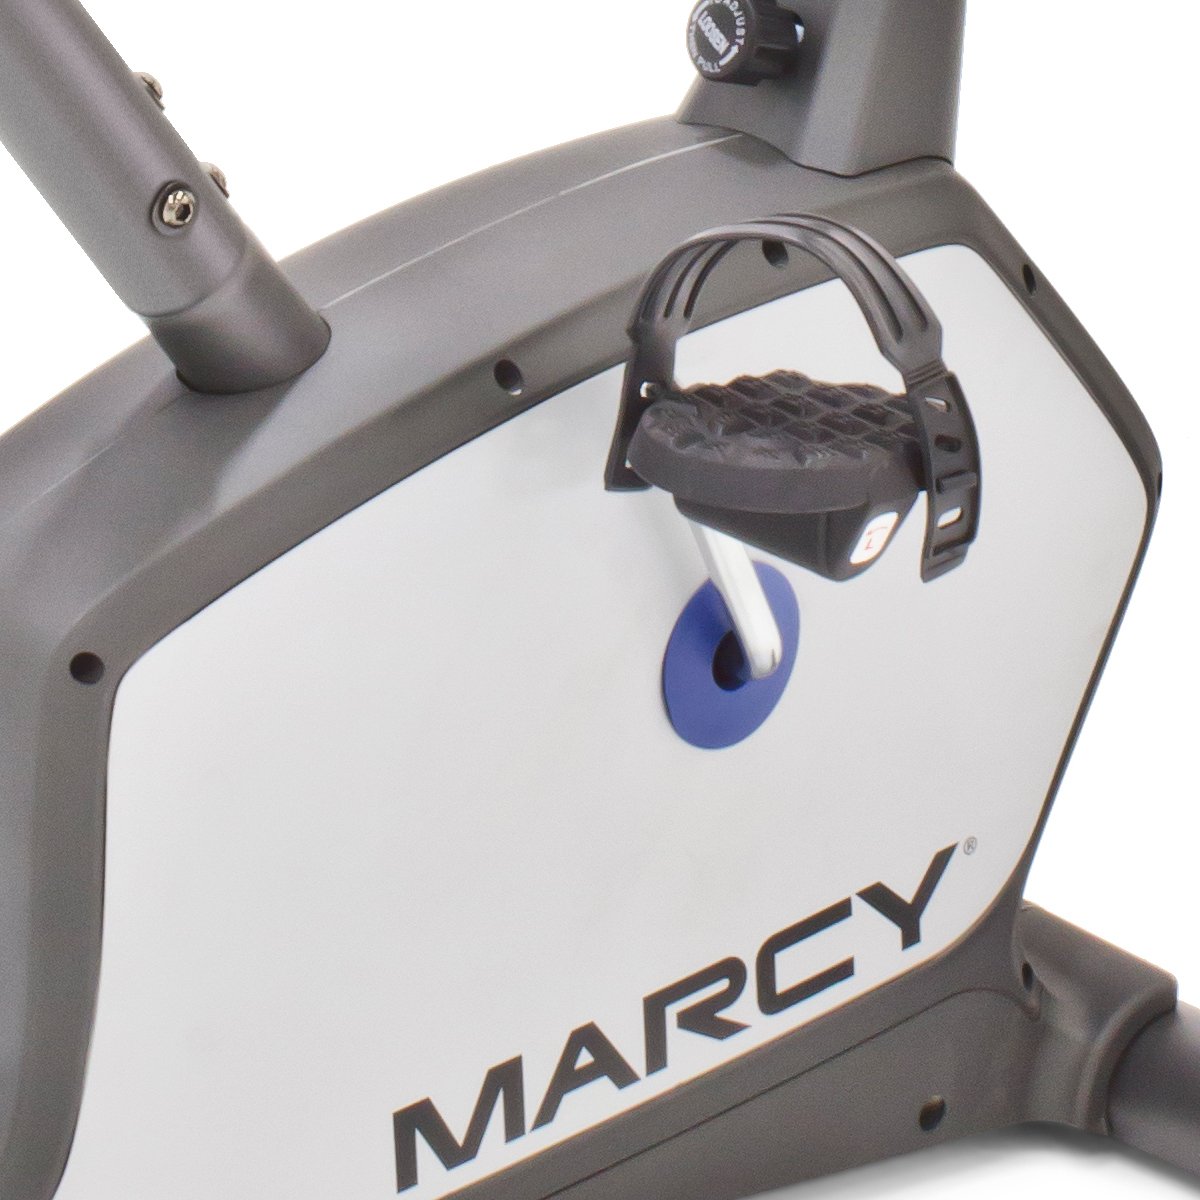 Marcy Upright Exercise Bike with Adjustable Seat and 8 Magnetic Resistance Preset Levels NS-1201U,Black/Grey/Silver